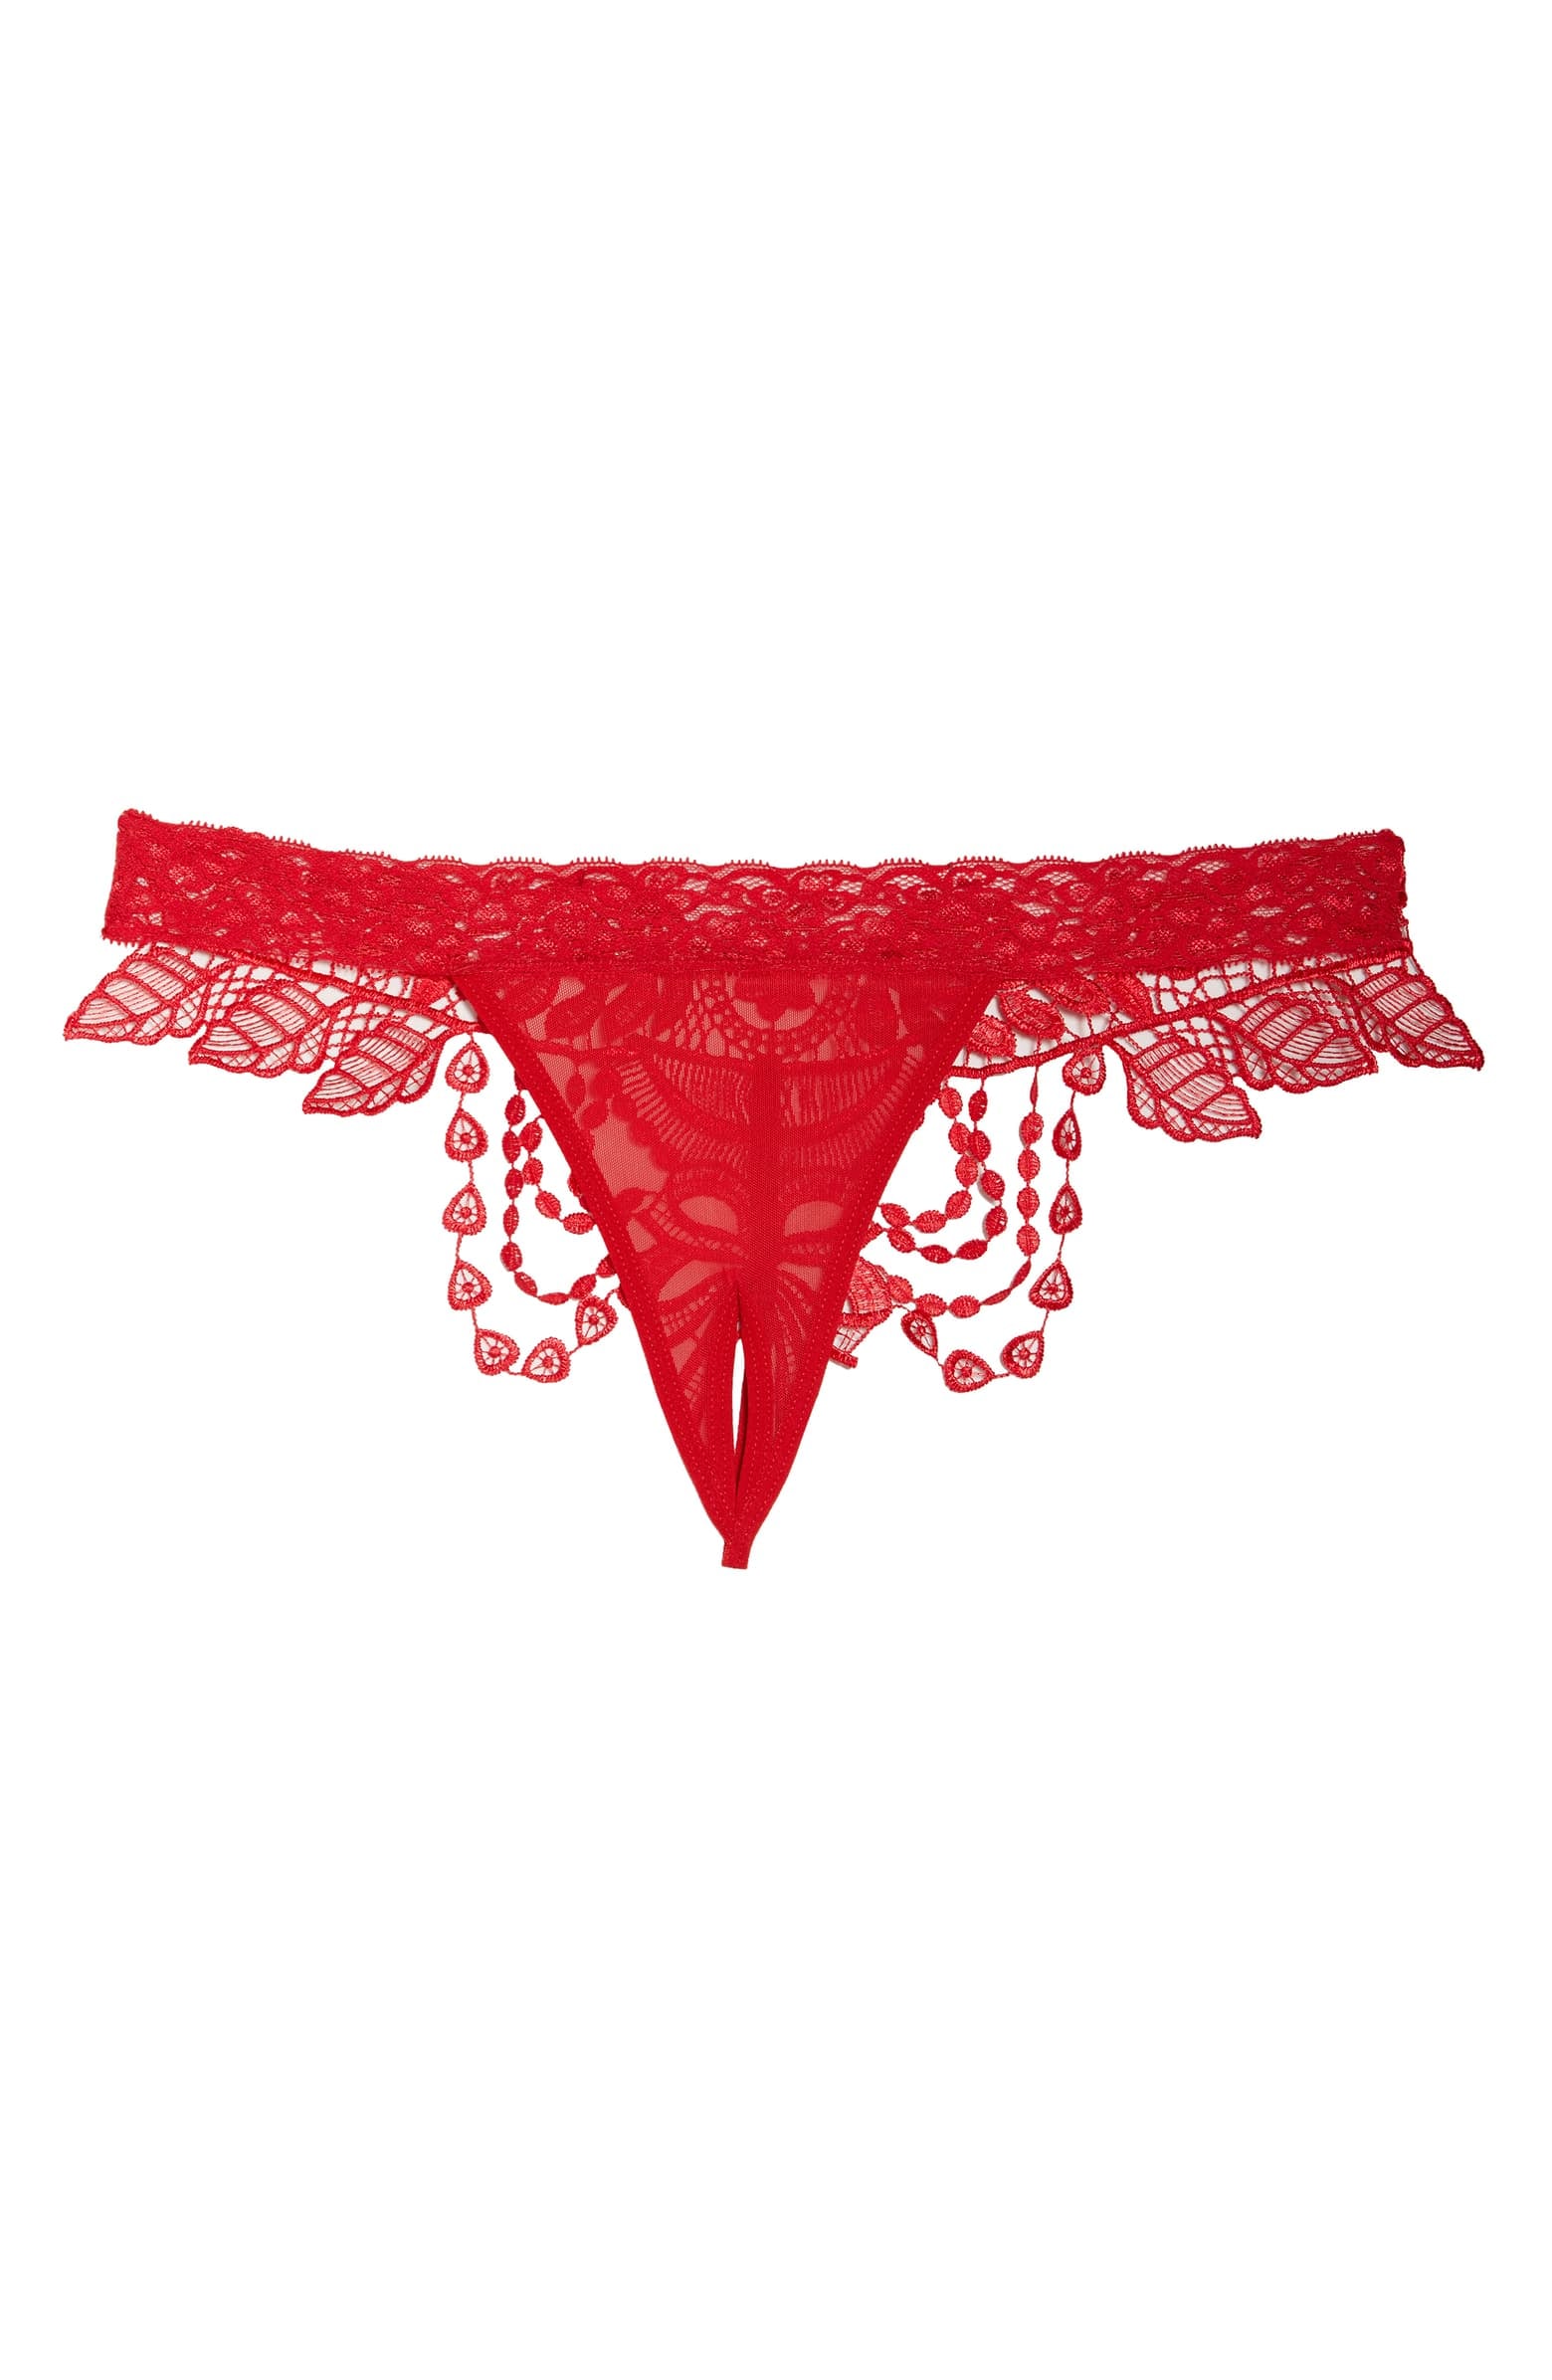 Ann Summers Fianna Open Gusset Thong, If You've Never Tried Crotchless  Panties Before, These 15 Sexy Pairs Might Change Your Mind